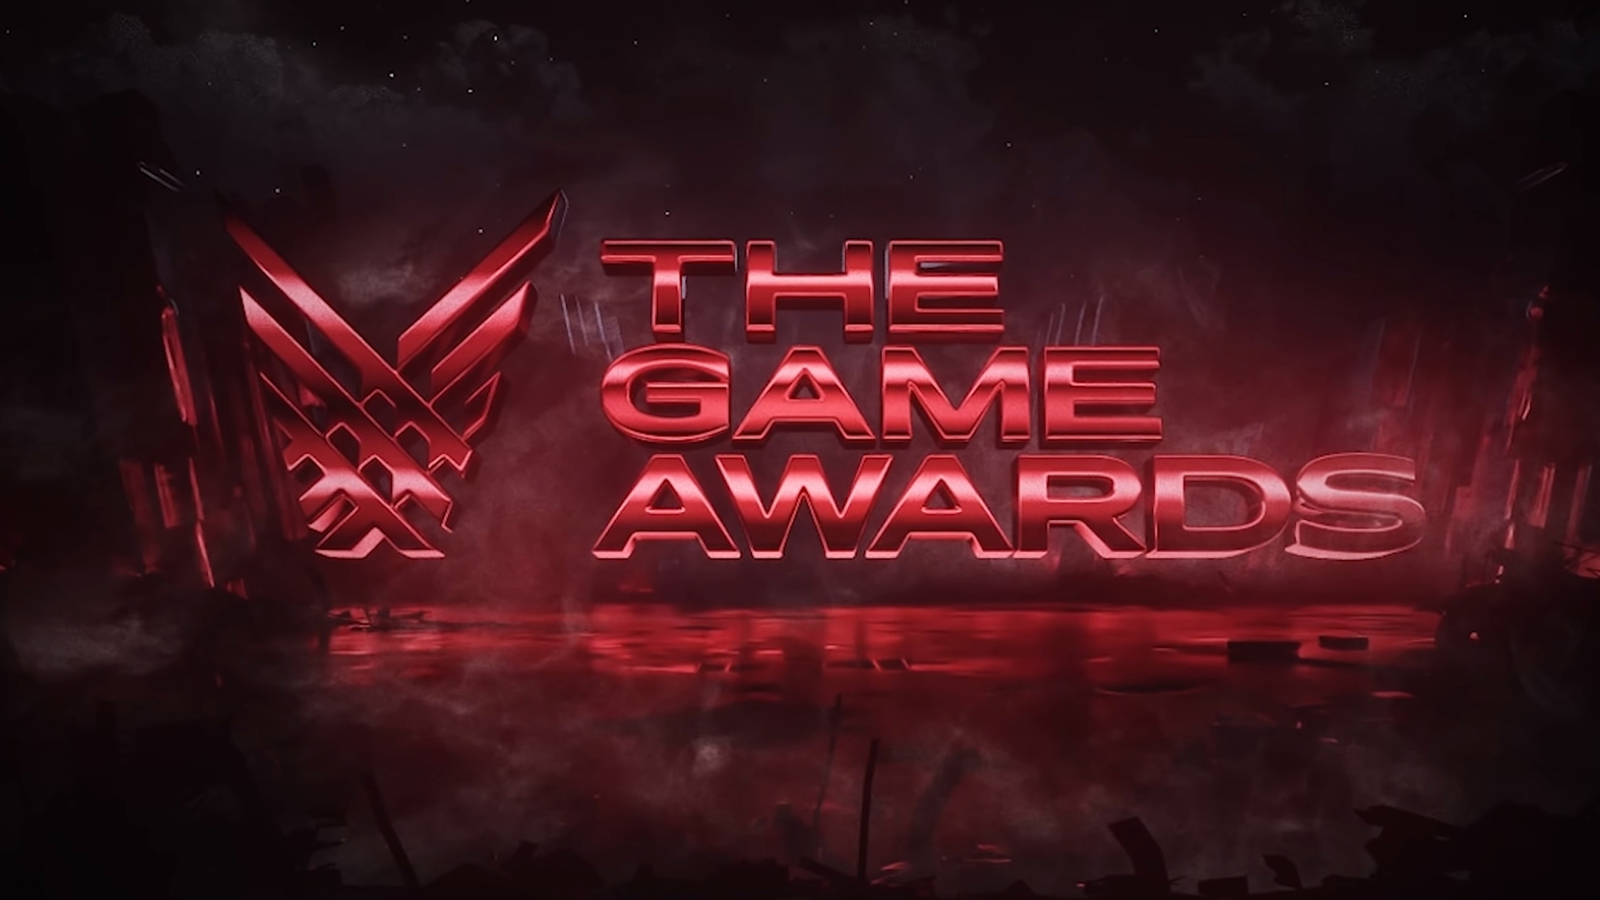 The Game Awards 2020 dates, new award announced - Polygon